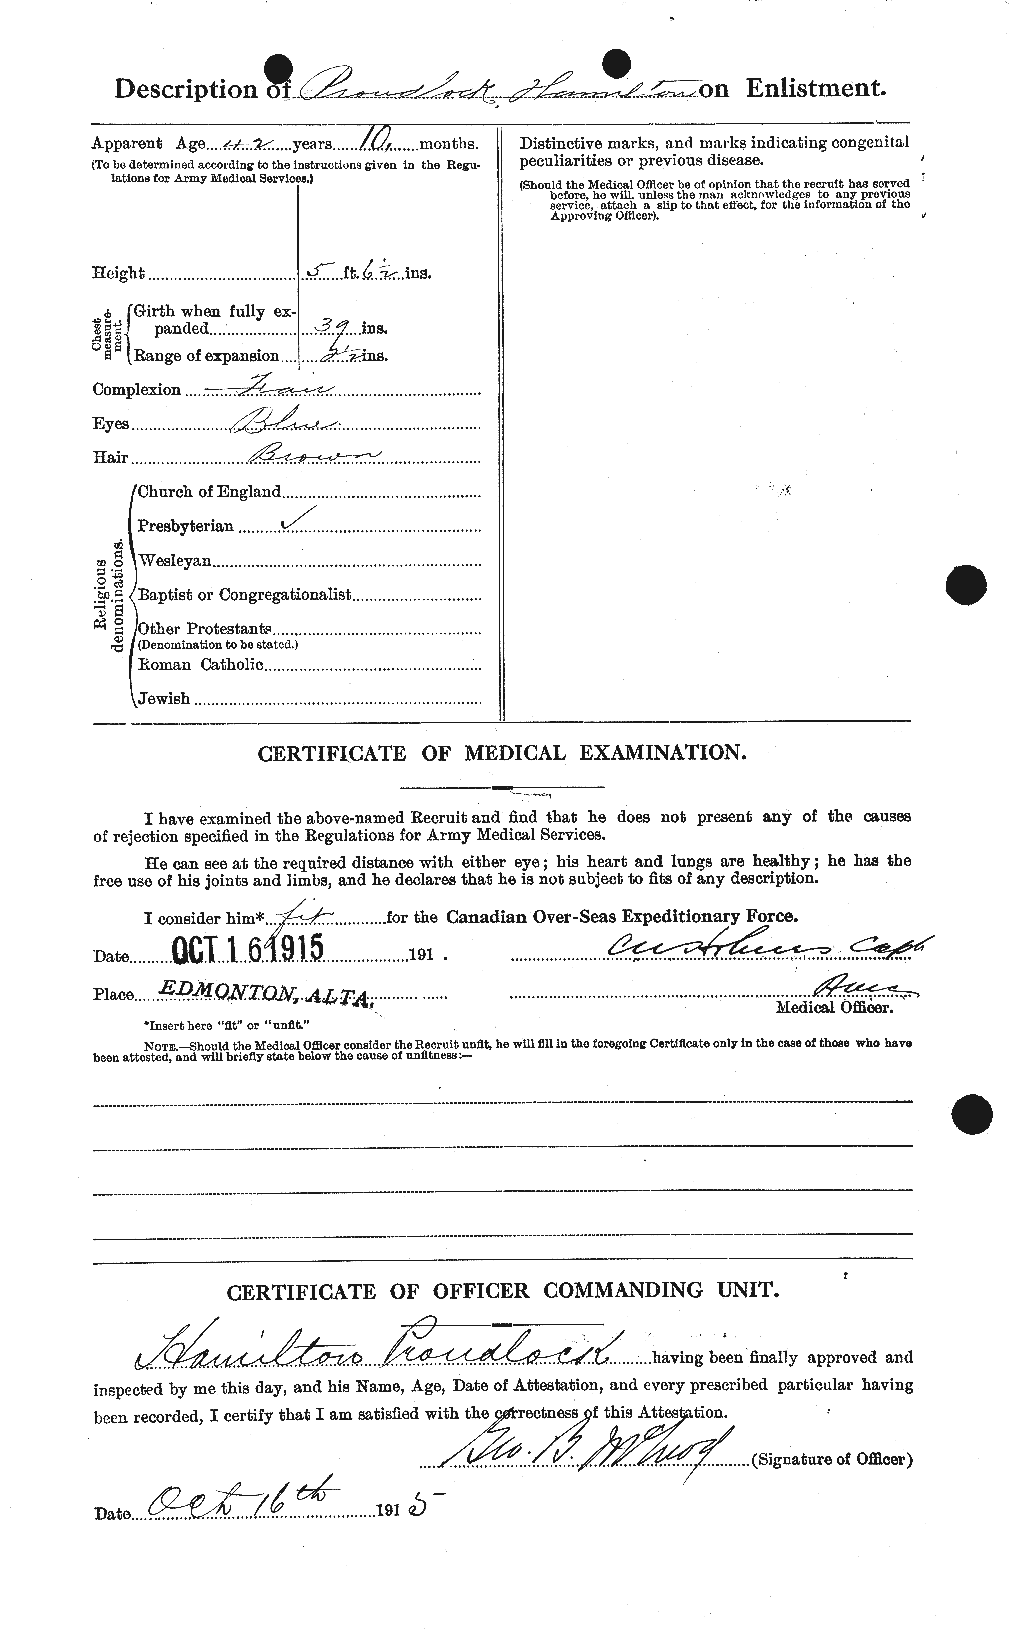 Personnel Records of the First World War - CEF 591483b